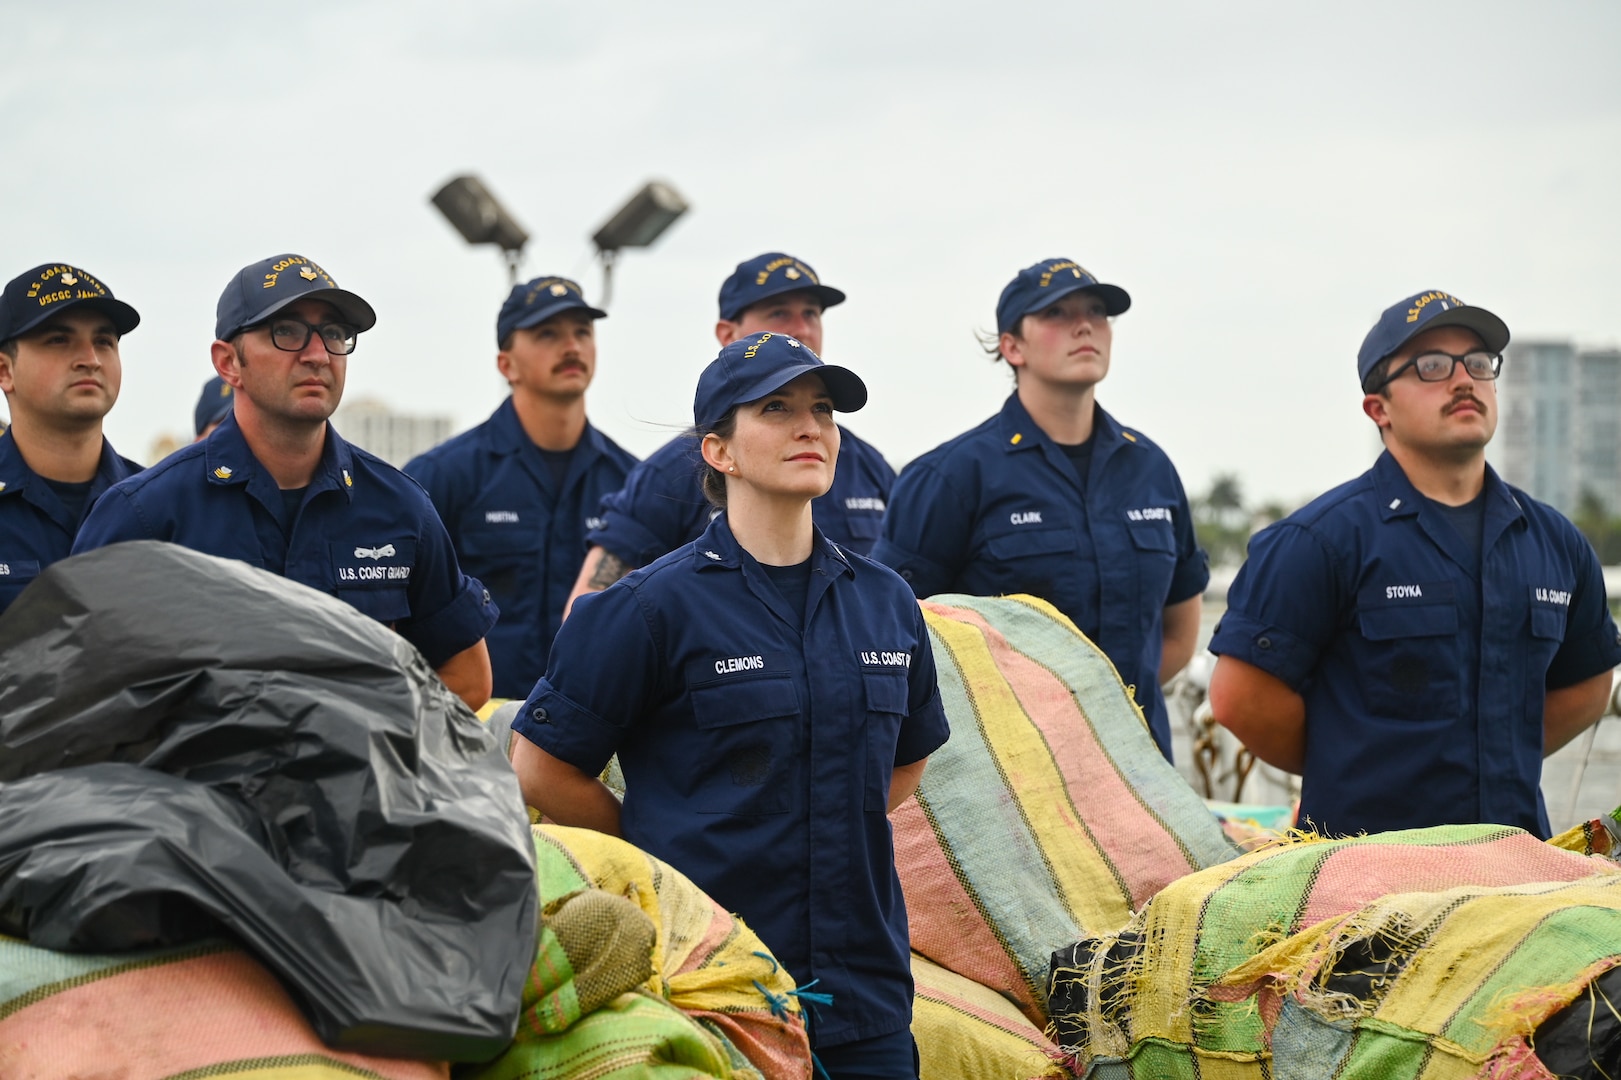 The crew of the Coast Guard Cutter James pose with more than $445 million in illegal drugs seized by Coast Guard and partner agencies in Port Everglades, Florida, Oct 26, 2023. The offload is a result of suspected drug smuggling interdictions in the Caribbean and Eastern Pacific Ocean. (U.S. Coast Guard photo by Petty Officer 2nd Class Laticia Sims.)